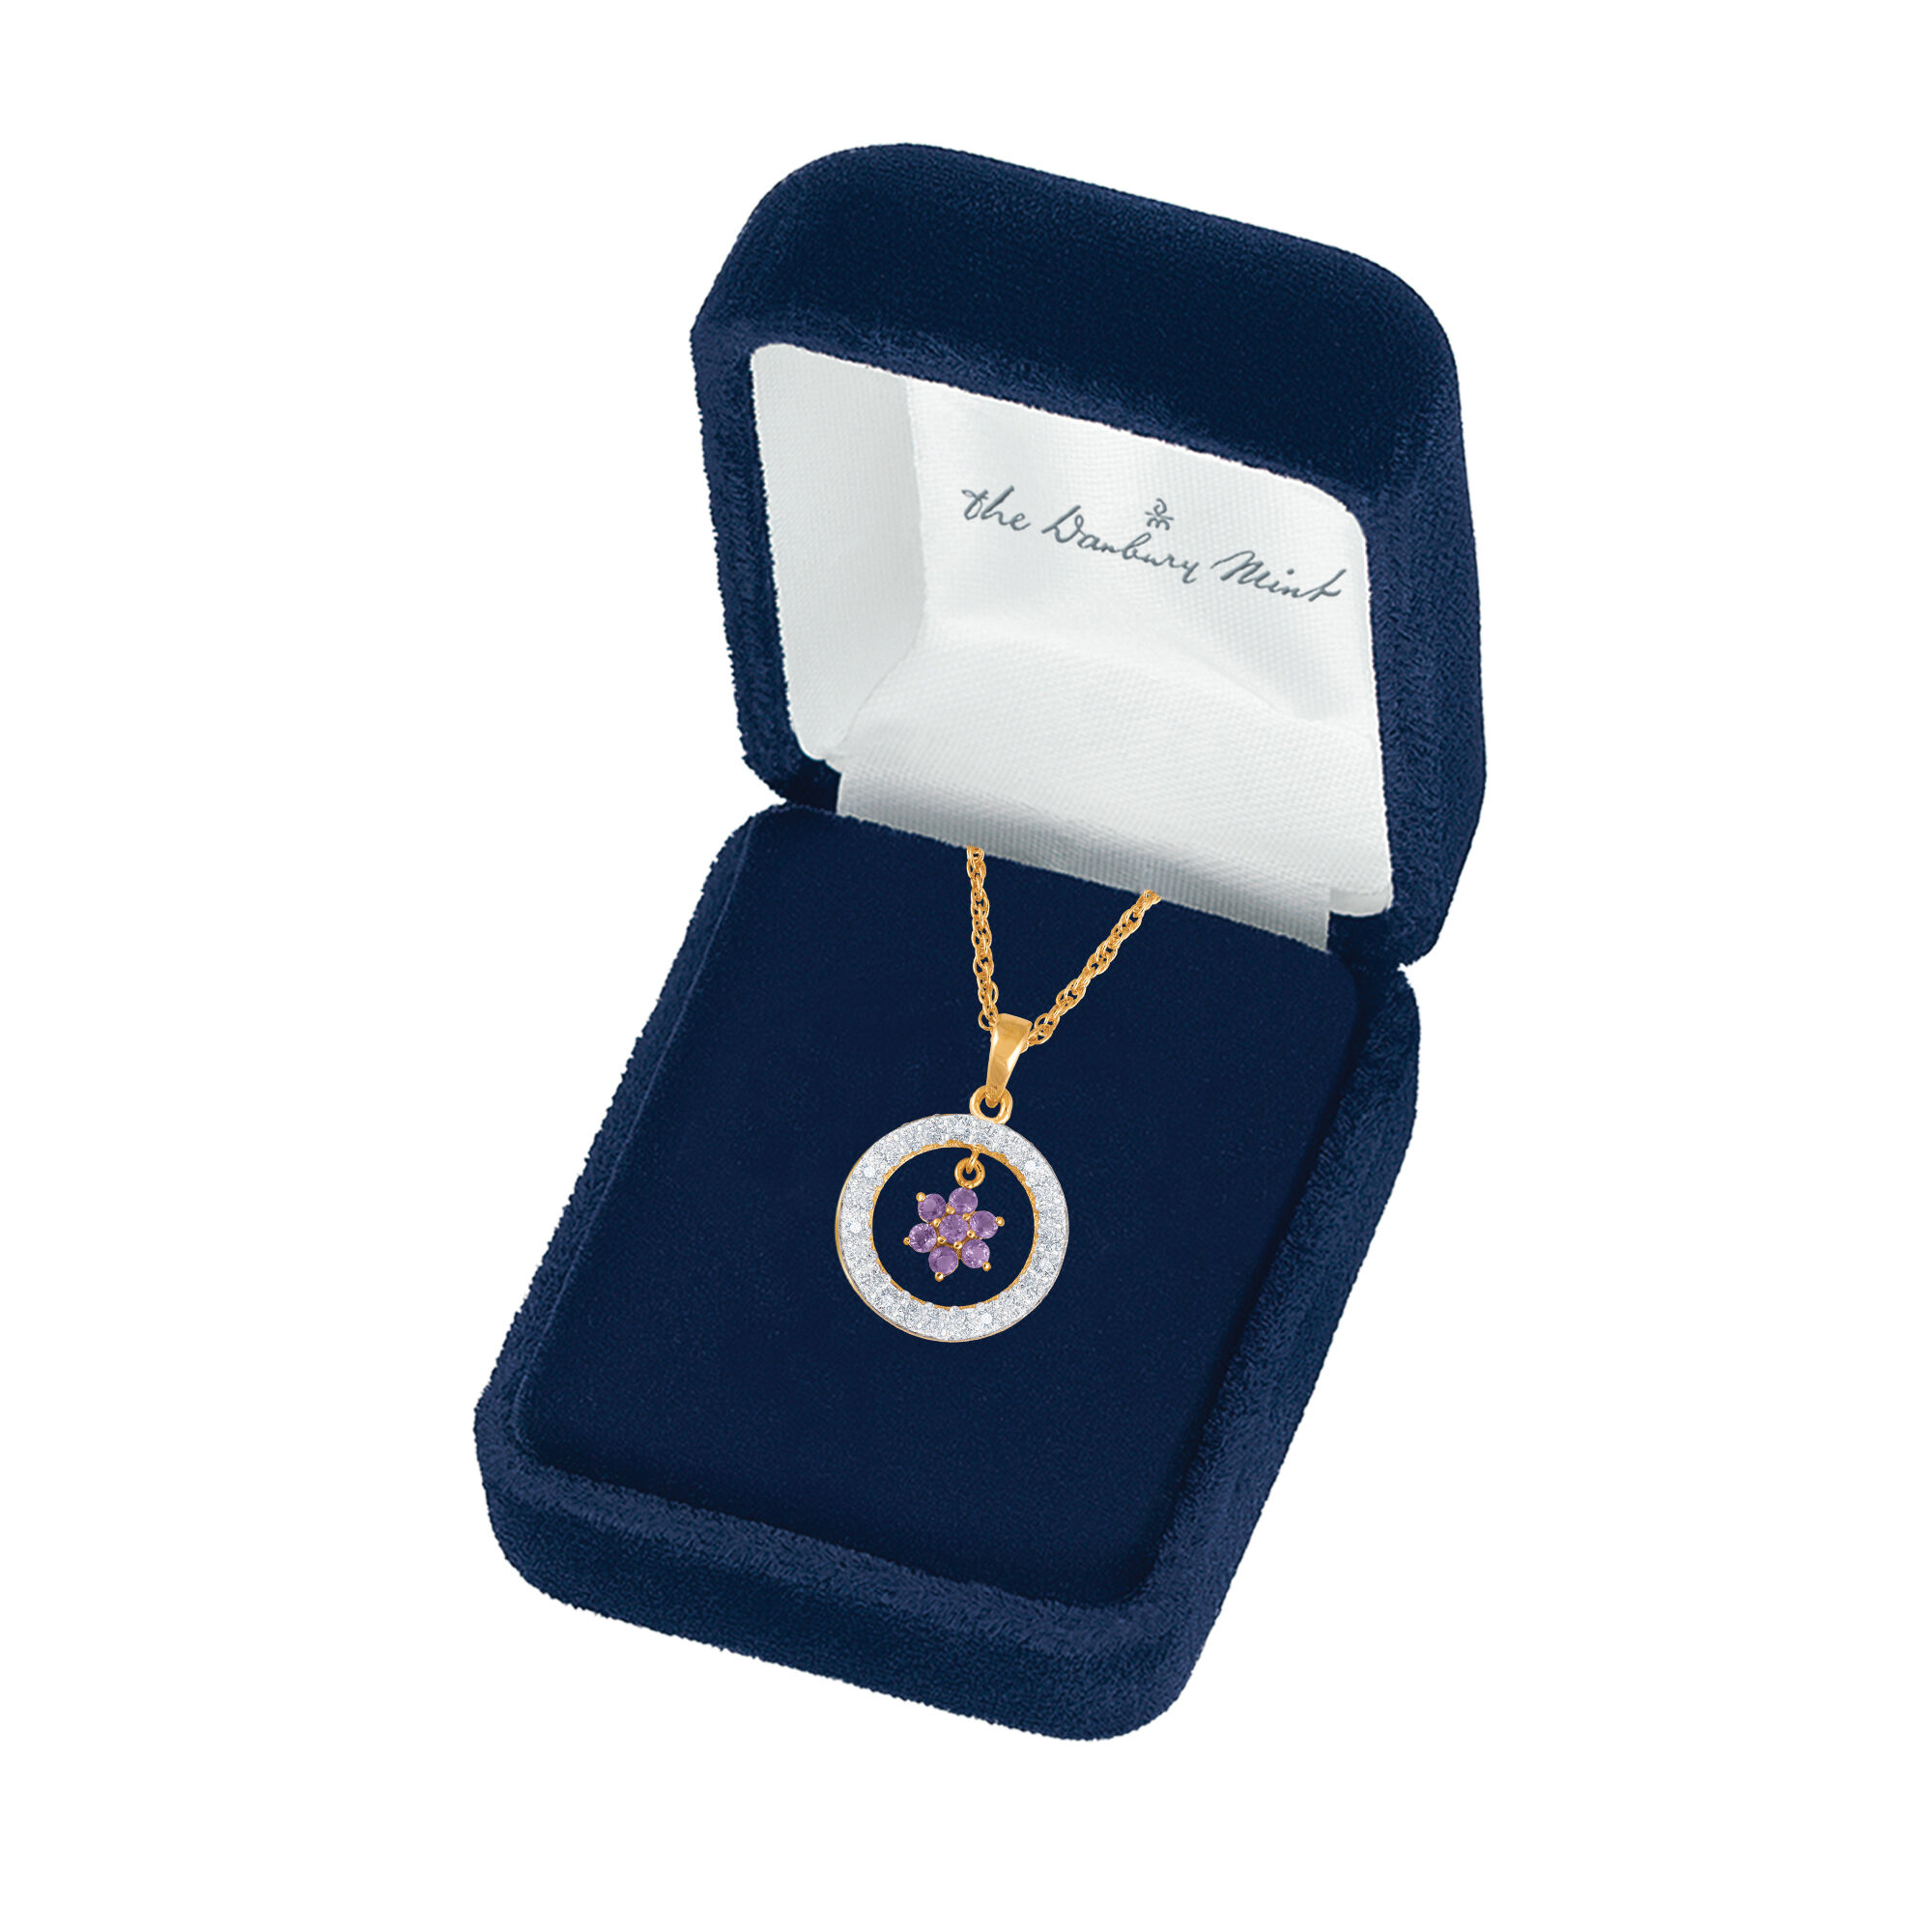 Floral Delight Pendant 4509 0024 g gift box